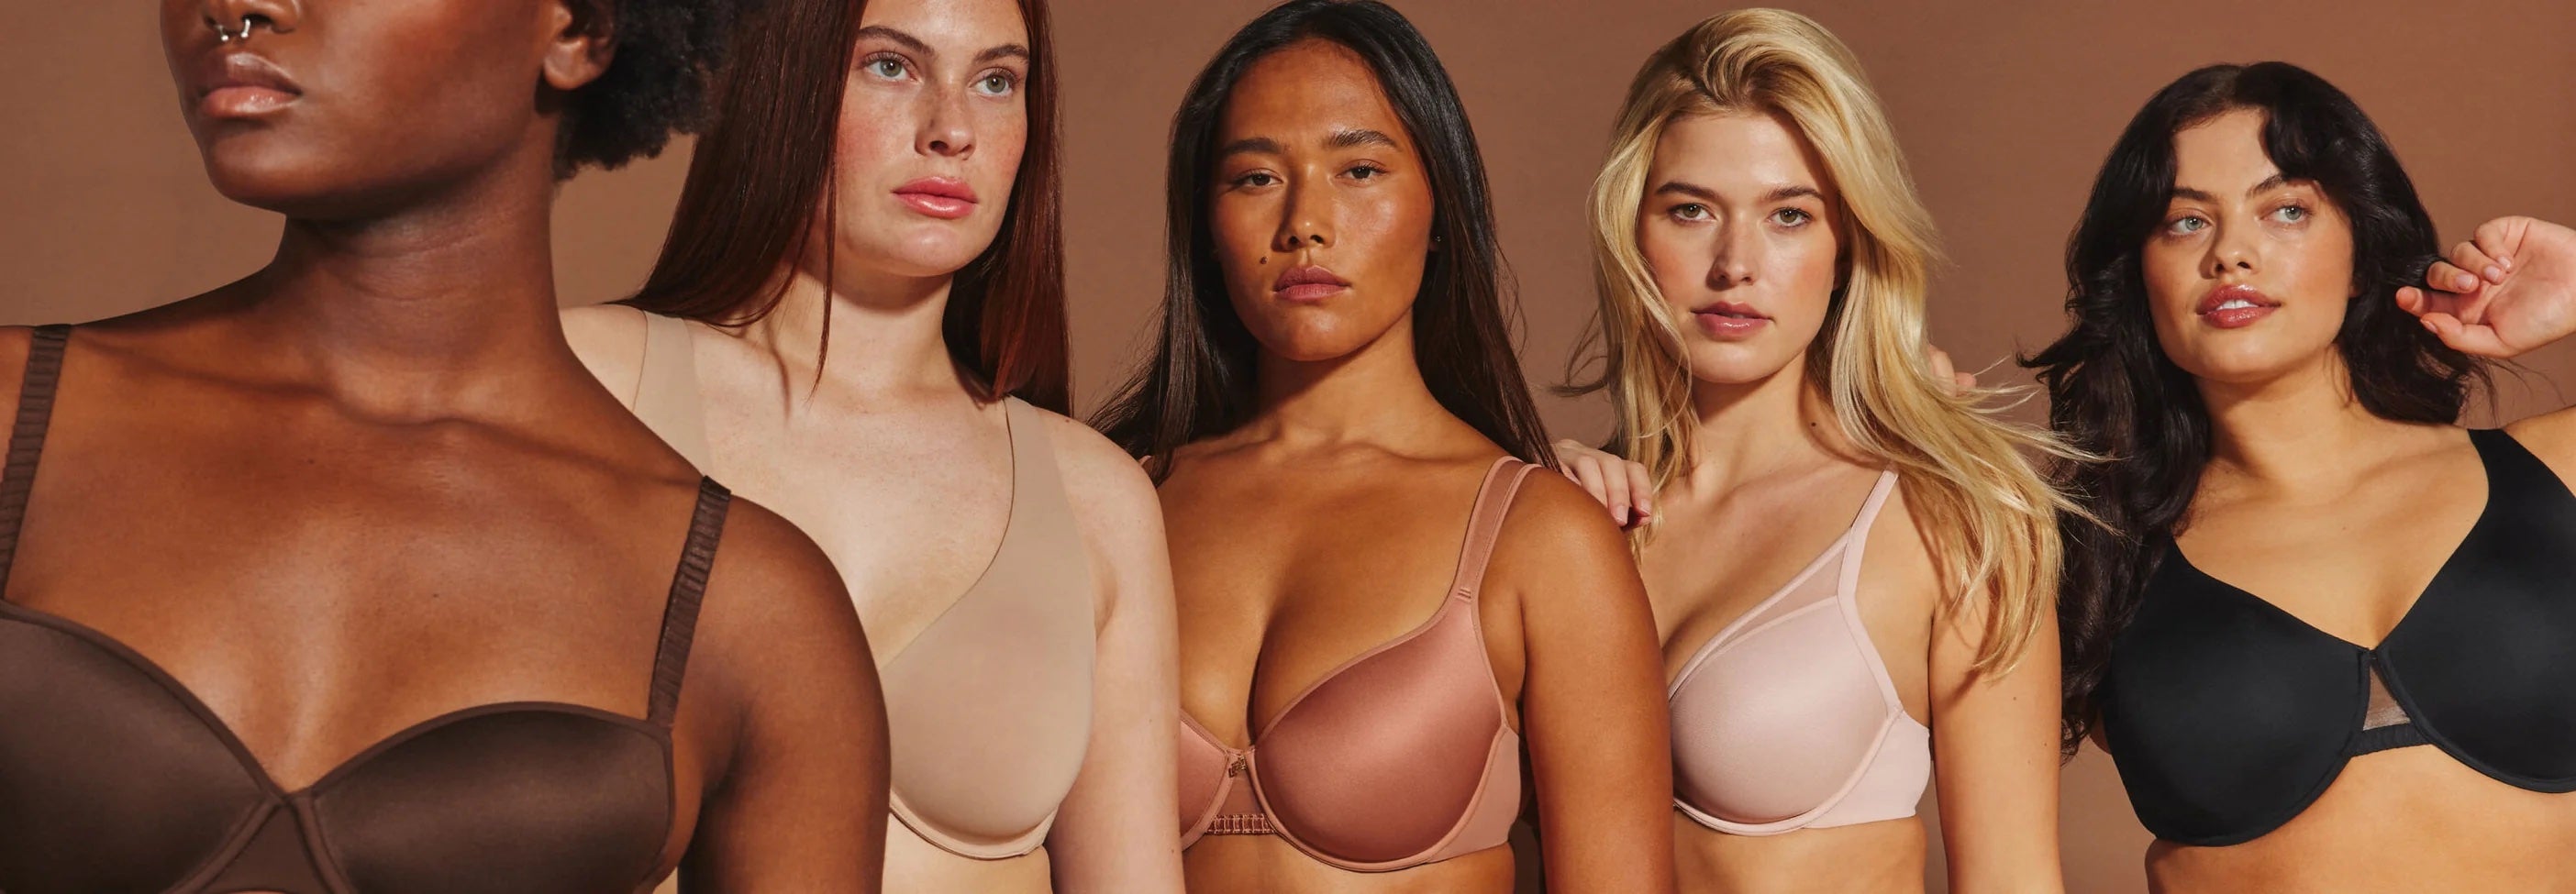 Third Love: LAST CHANCE to save at our Summer Bra Event